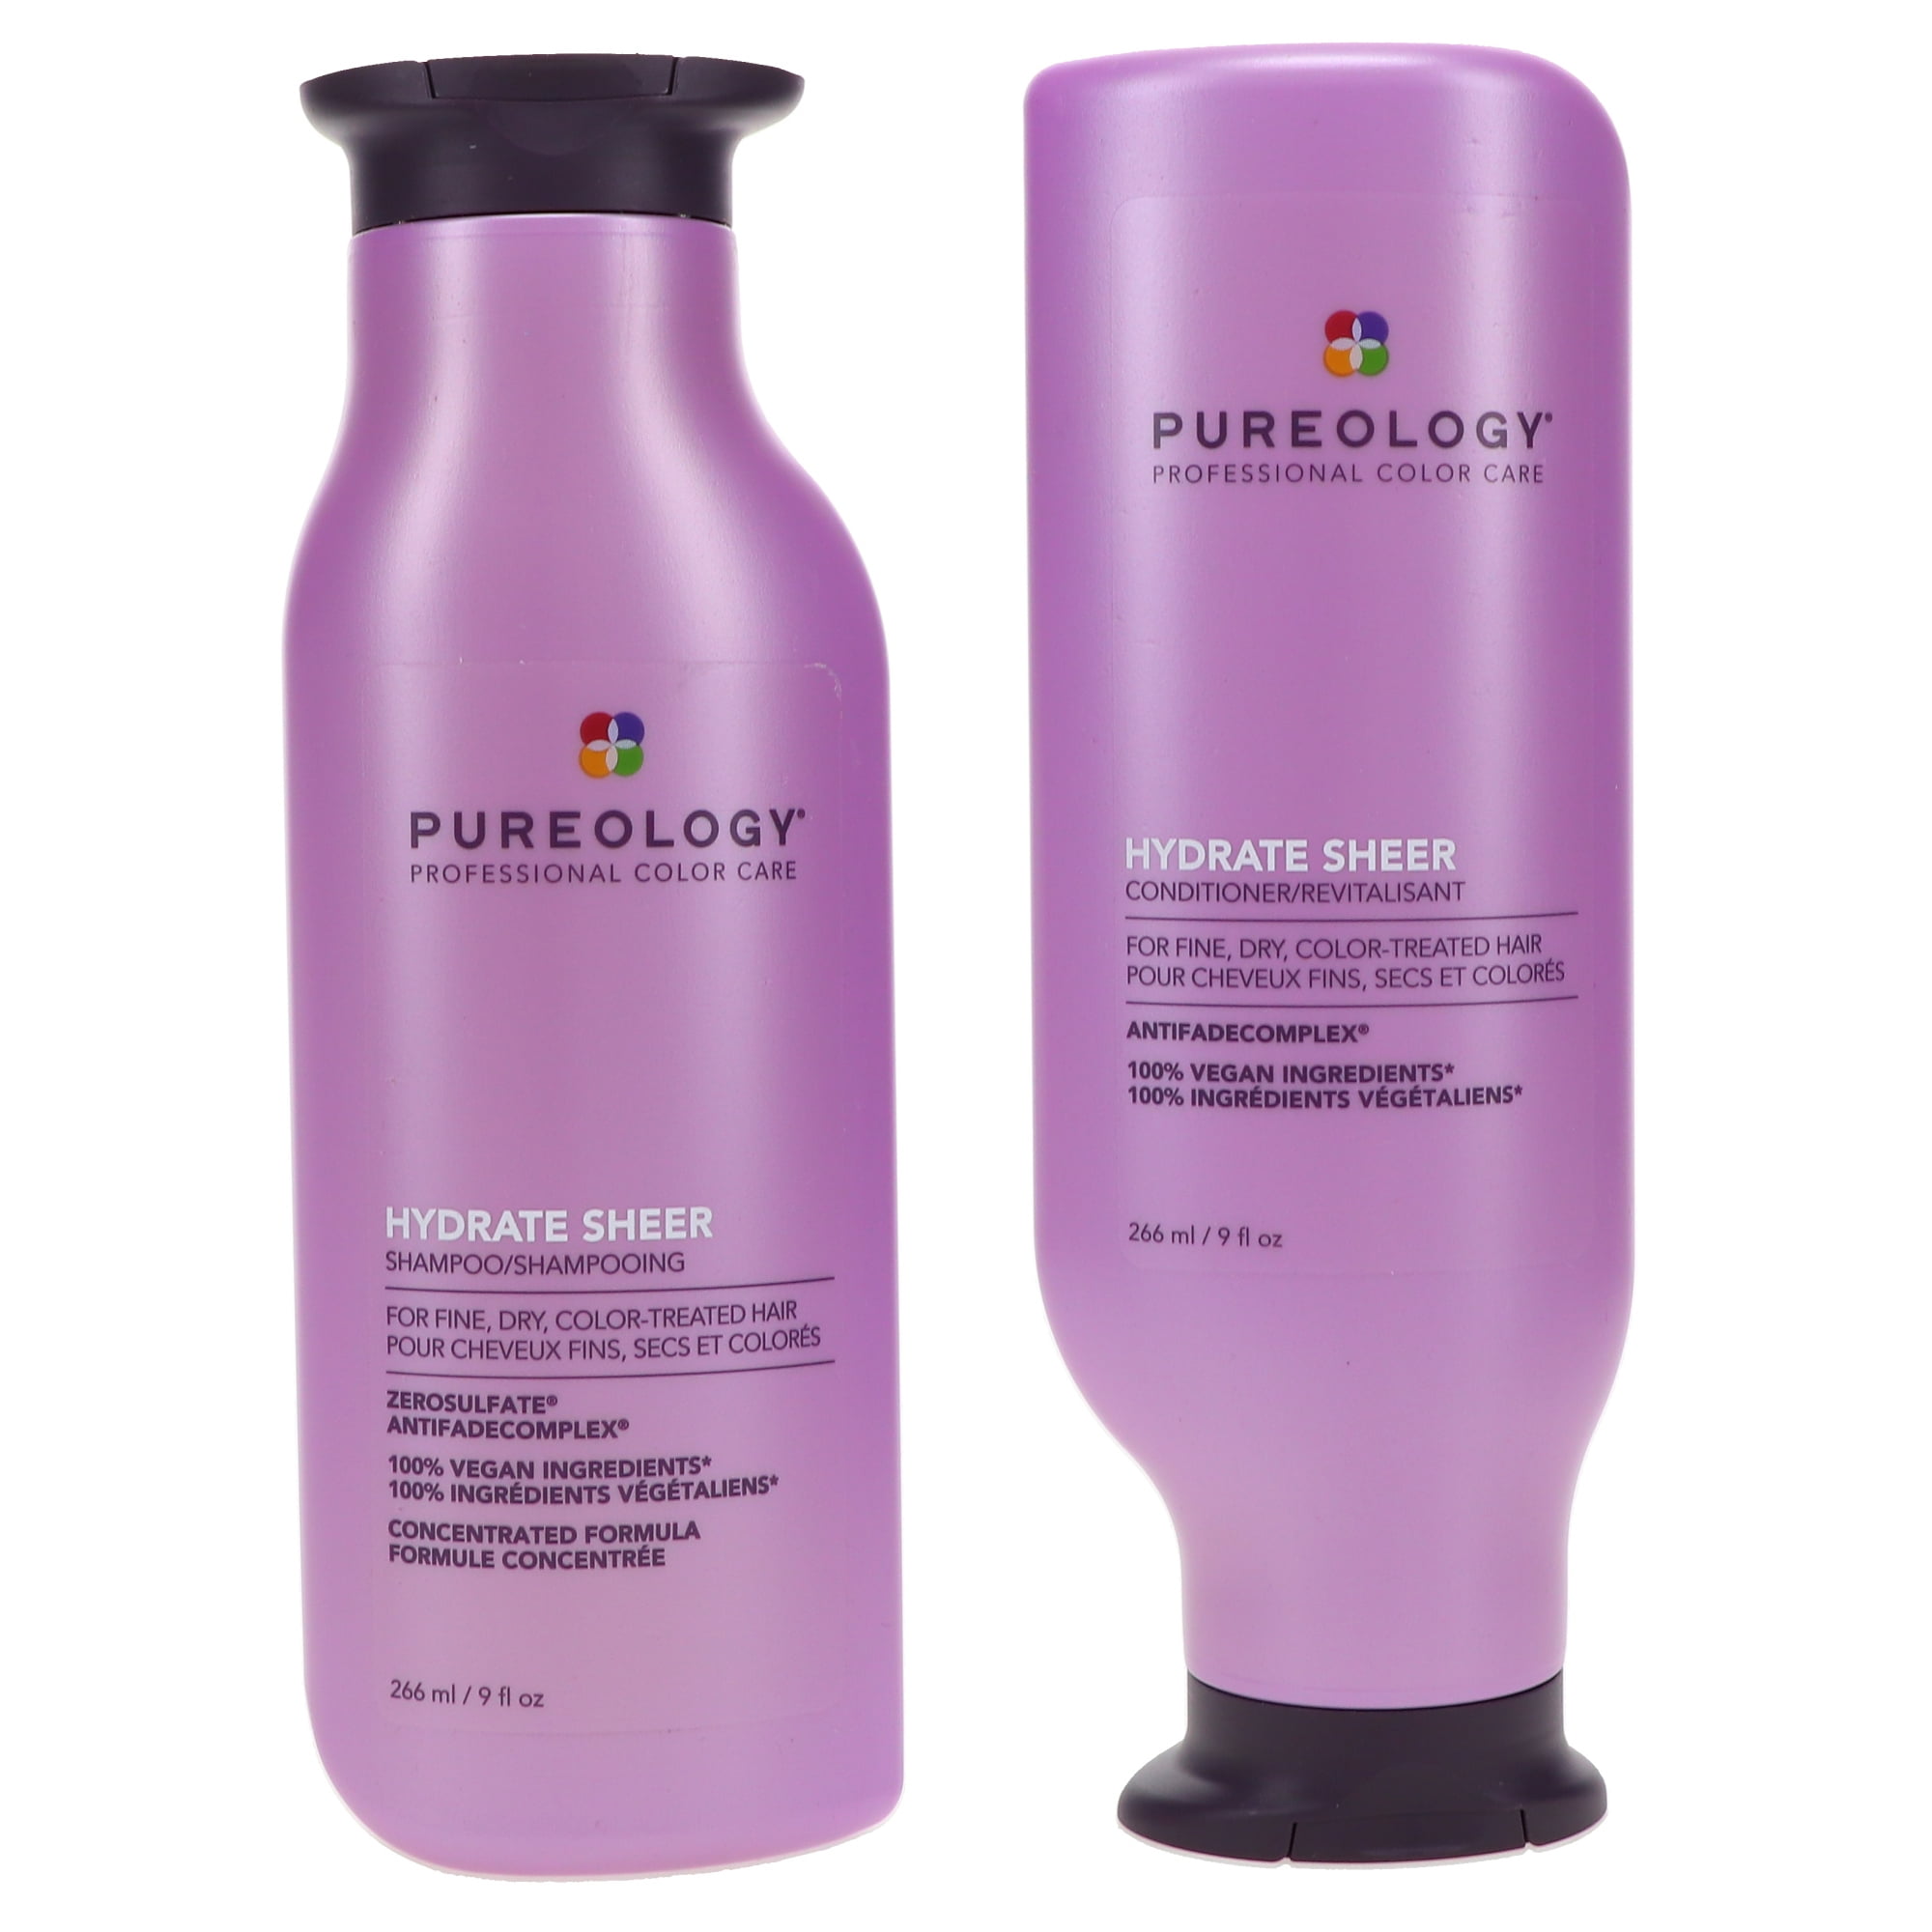 Pureology Hydrate Sheer Shampoo 9 oz and Conditioner 9 Combo Pack Walmart.com